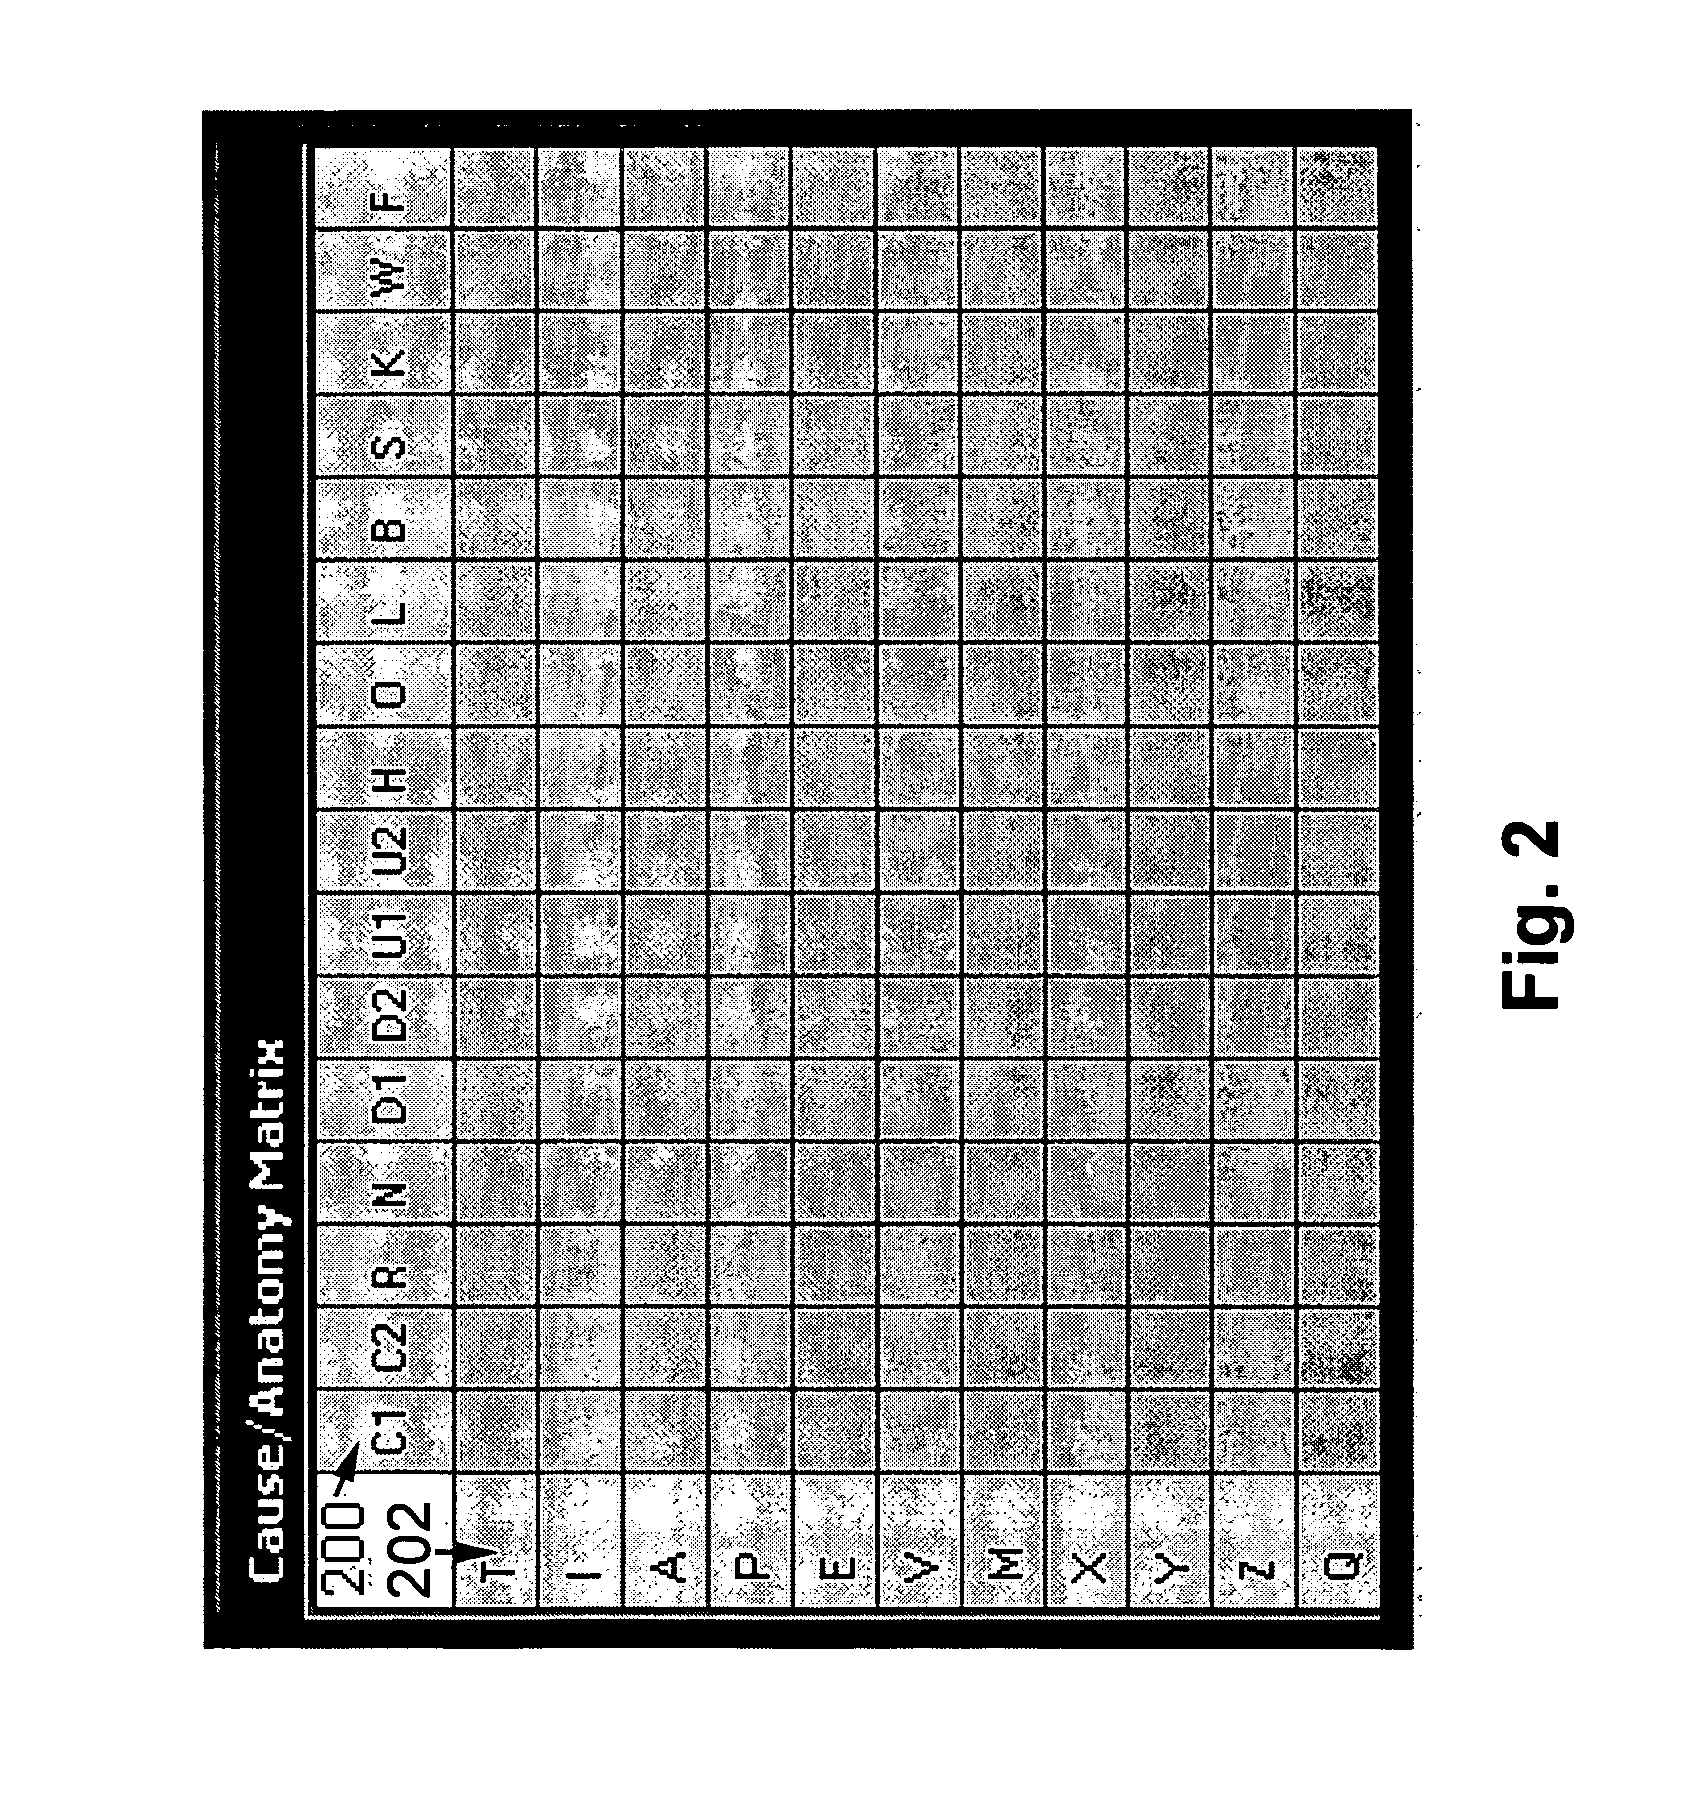 Matrix interface for medical diagnostic and treatment advice system and method